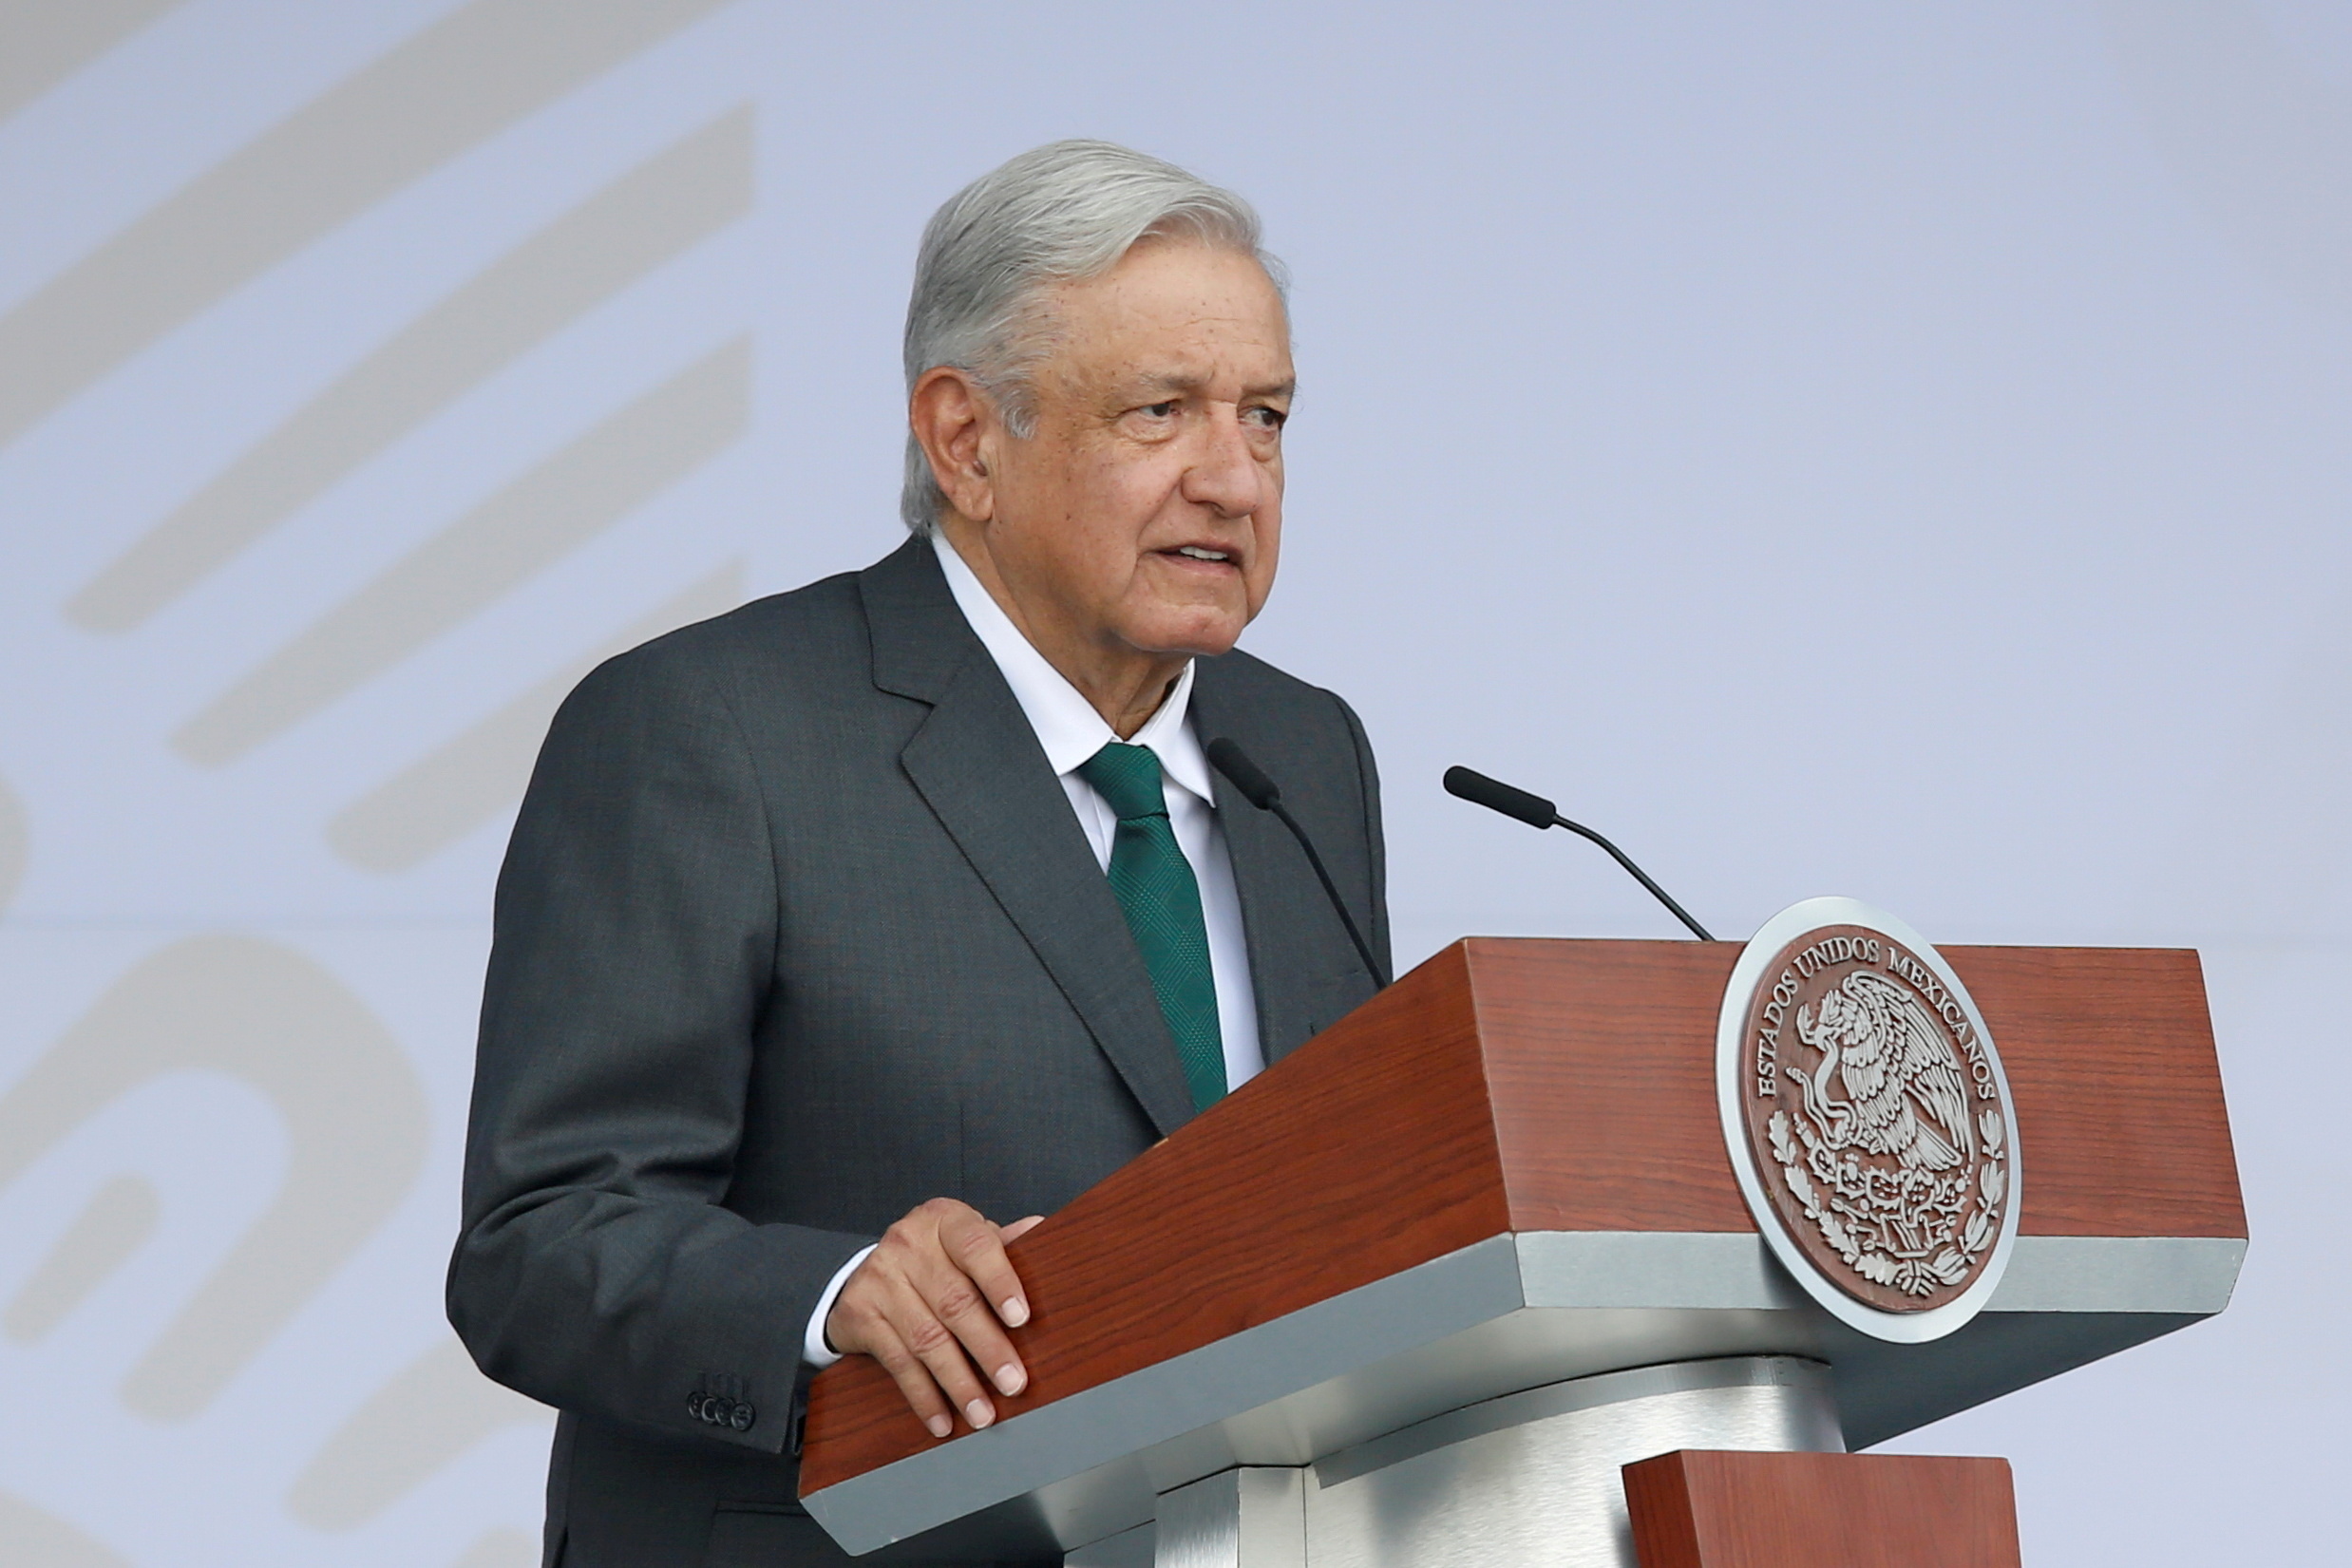 Mexico's President Andres Manuel Lopez Obrador speaks before the traditional military parade to mark the bicentennial of Mexico's Independence from Spain, and ahead of the summit of the Community of Latin American and Caribbean States (CELAC), at the Zocalo square in Mexico City, Mexico September 16, 2021. REUTERS/Gustavo Graf/File Photo